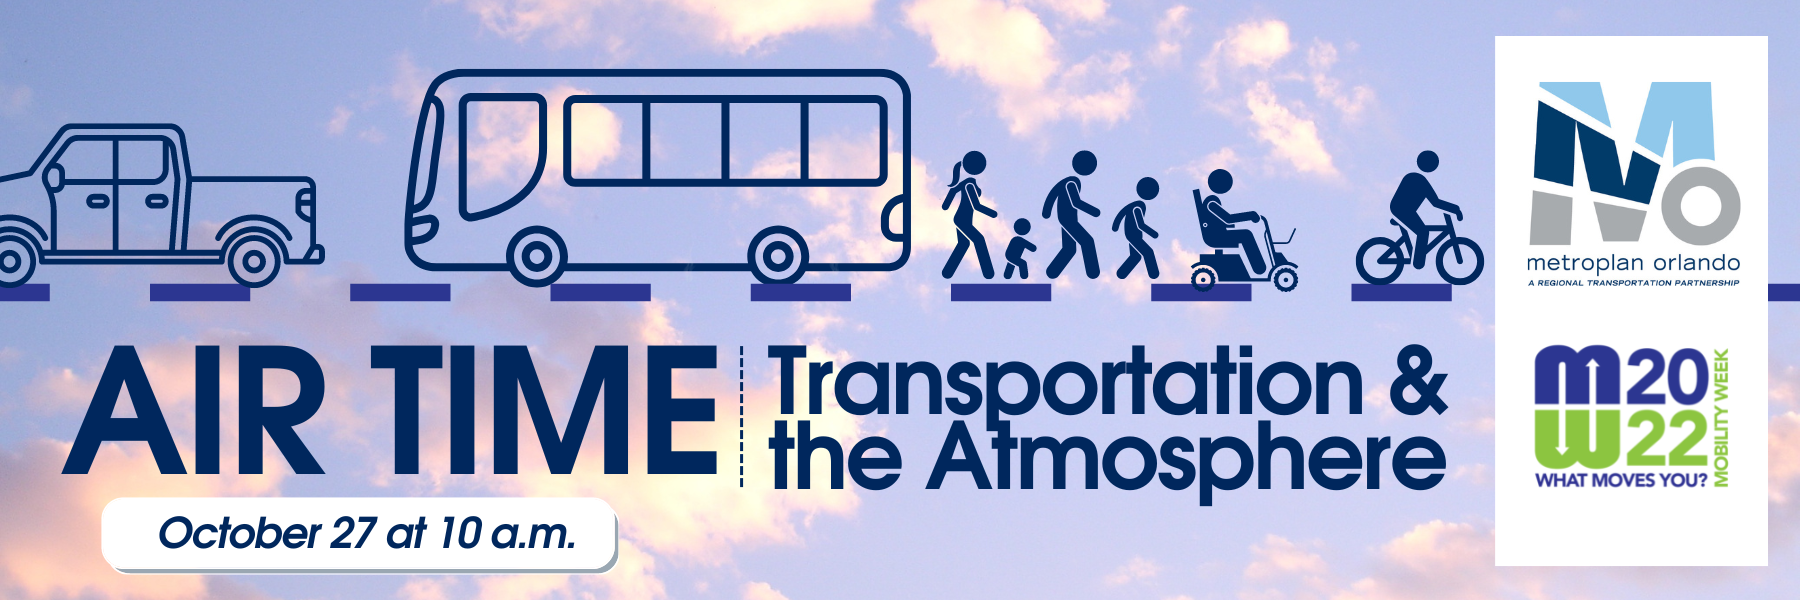 Air Time : Transportation &the Atmosphere will take place on October 27 at 10 a.m.